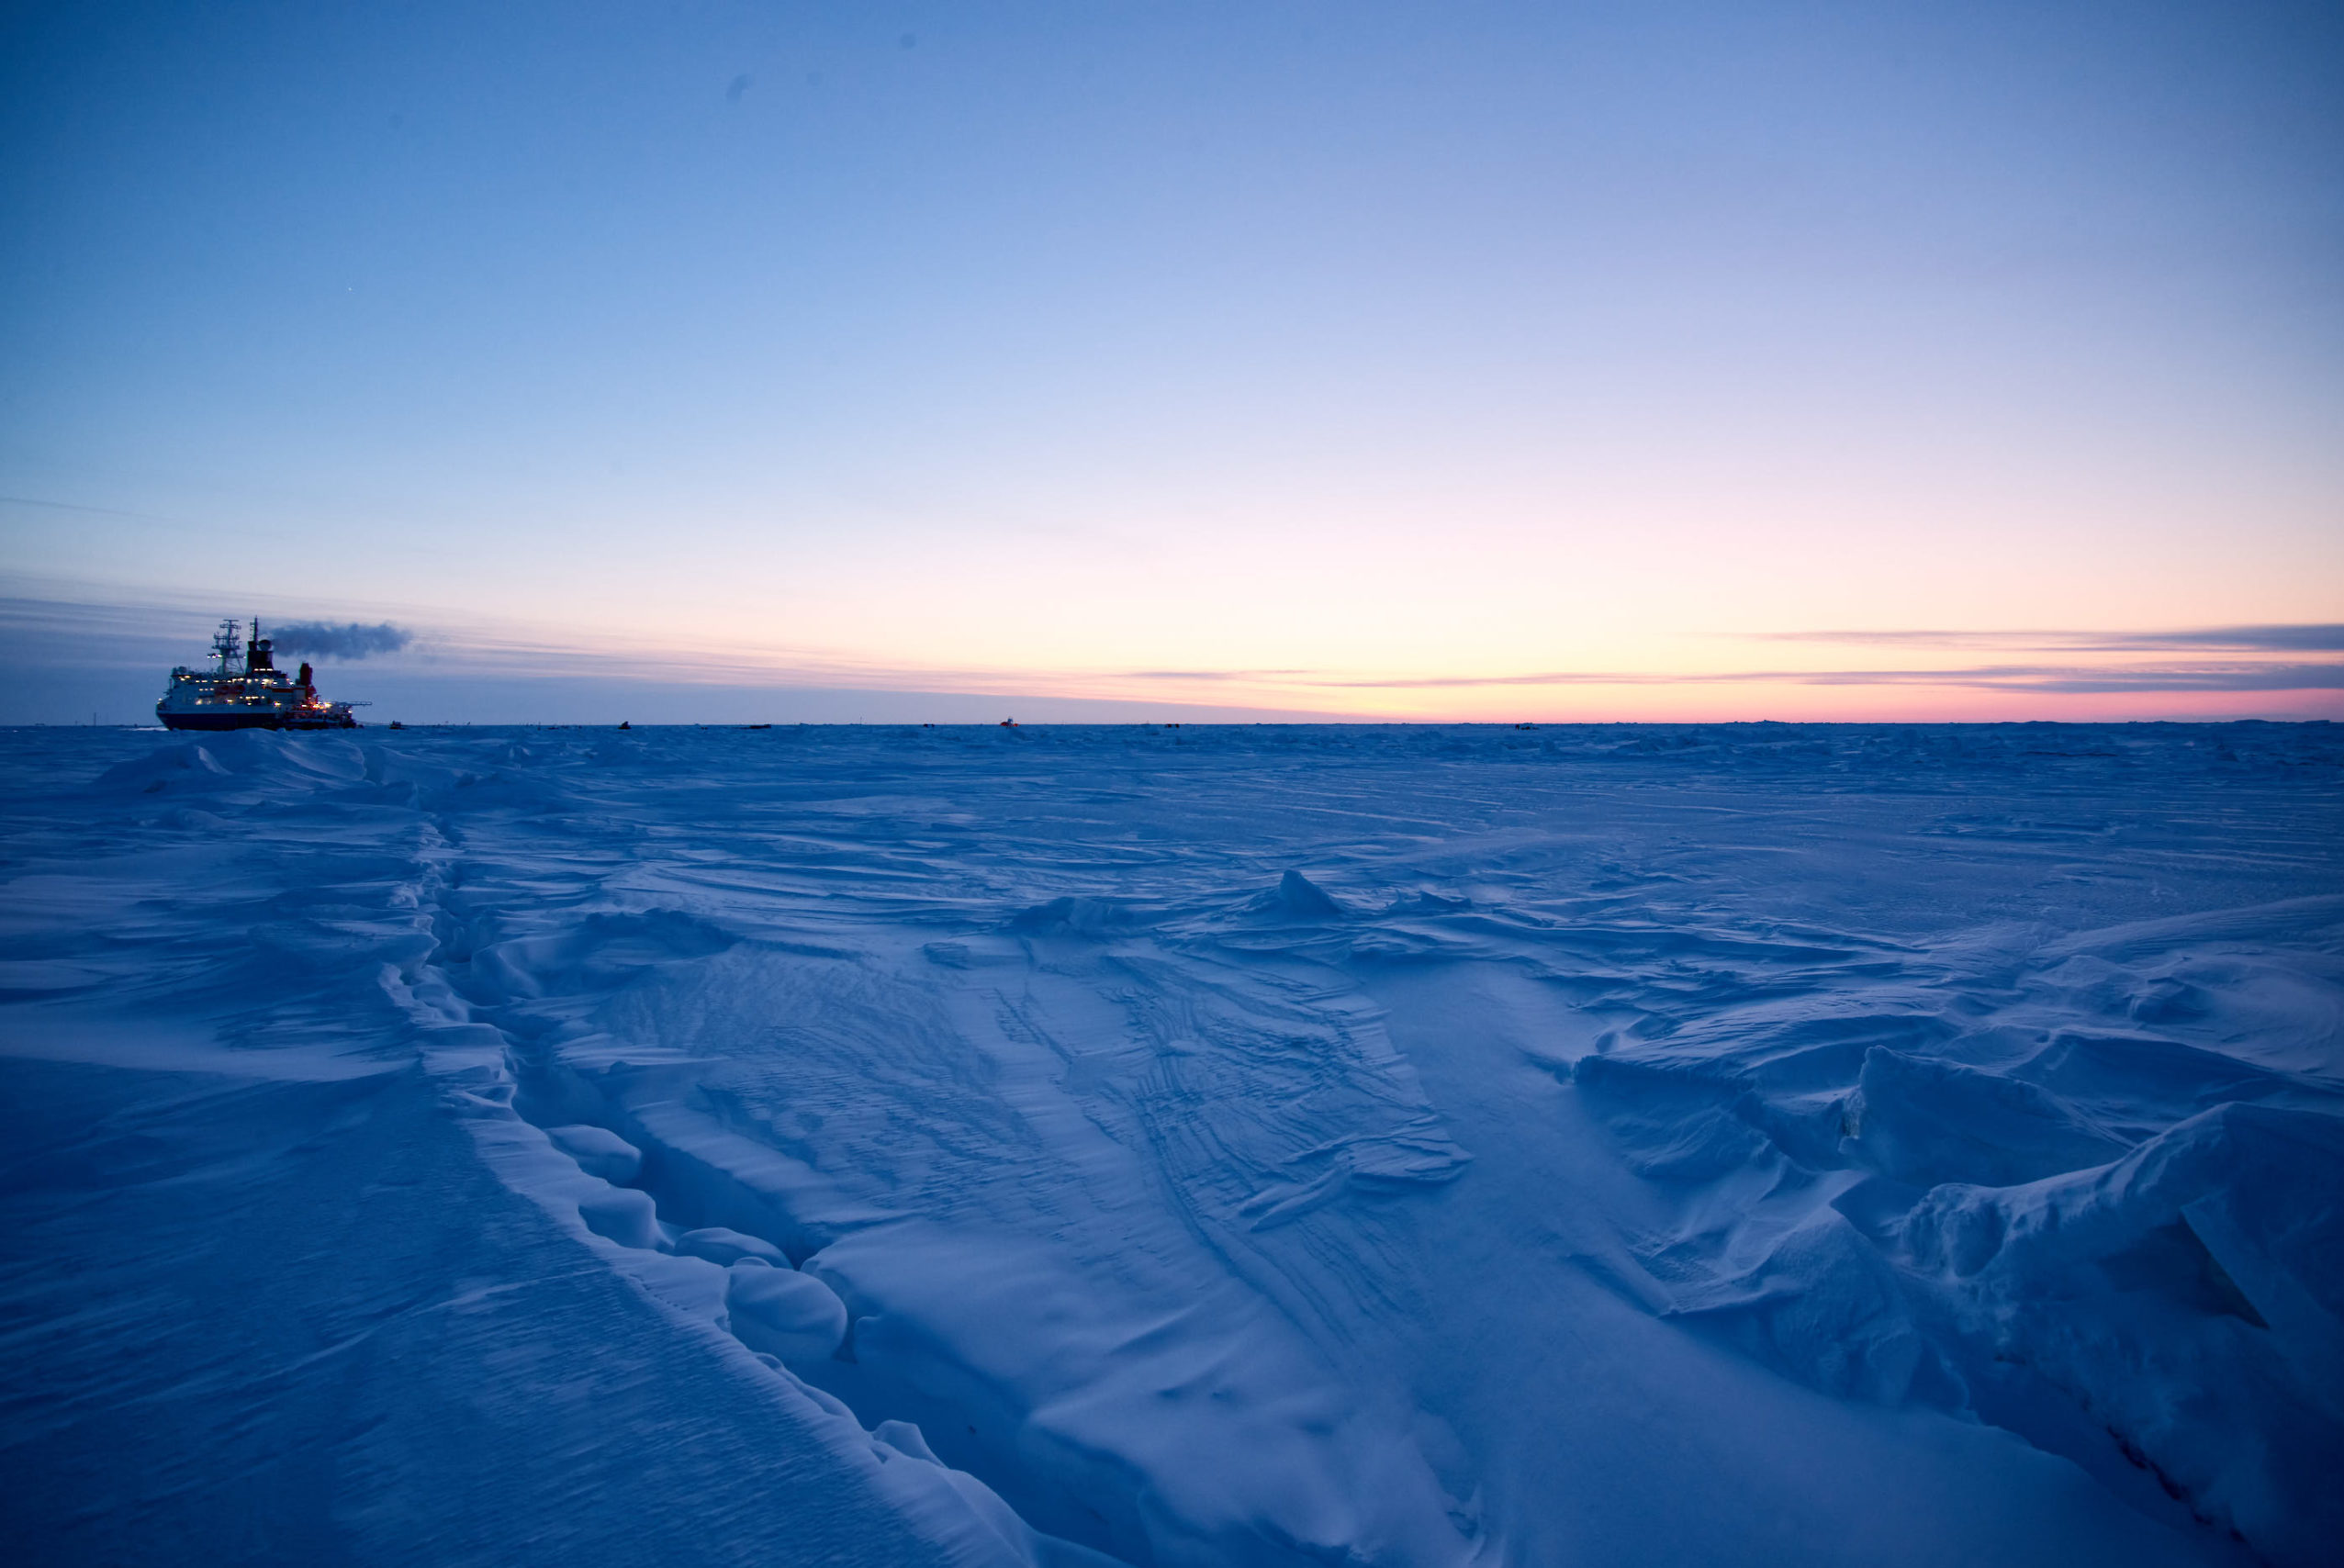 An Active Arctic: Where Sea Ice Meets the Midnight Sun - MOSAiC Expedition